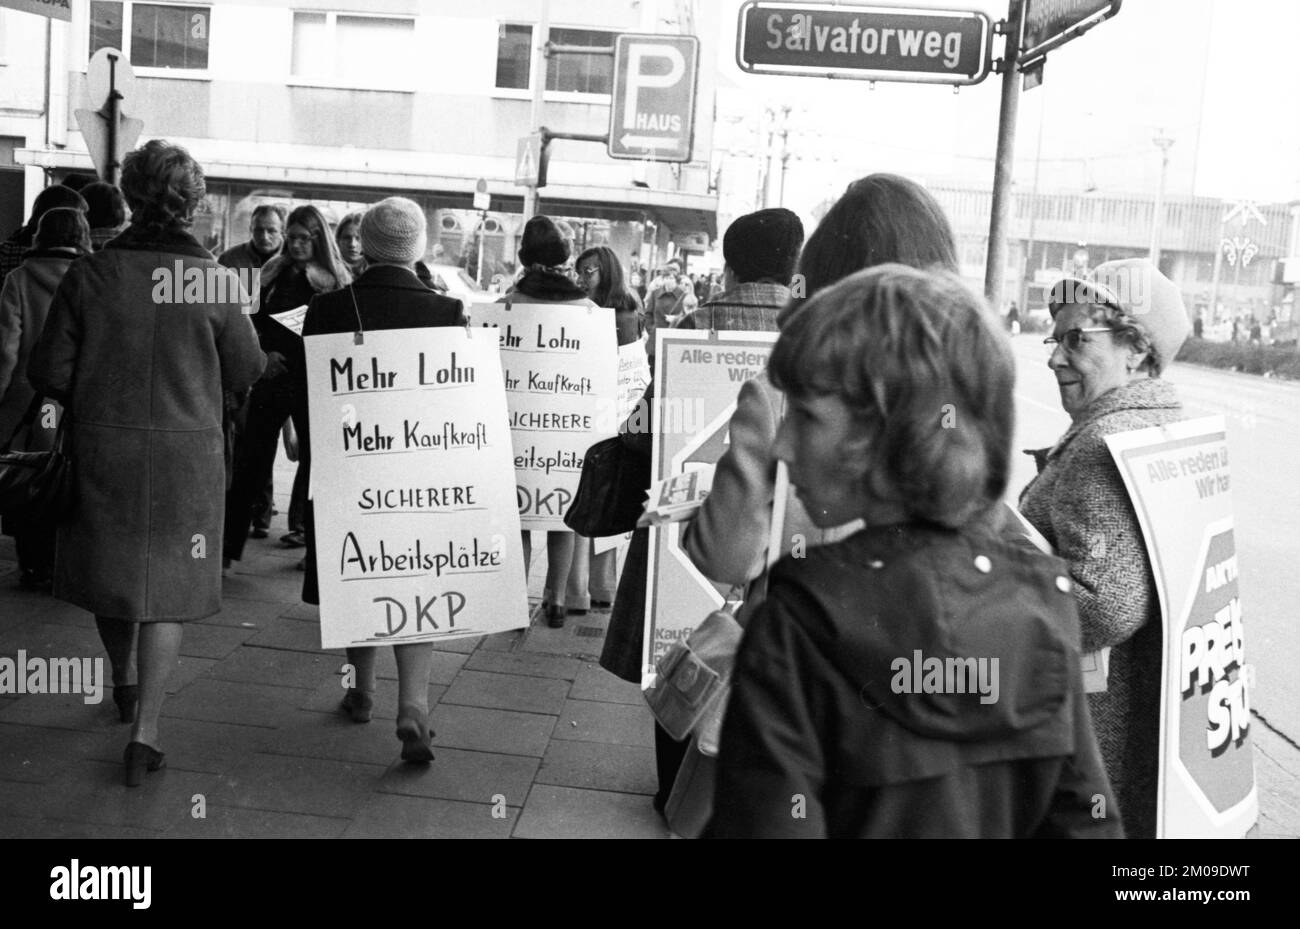 Supporters of the DKP (German Communist Party) at a woman's action in the pedestrian zone for a price freeze in Duisburg, 6.11.1974, Germany, Europe Stock Photo